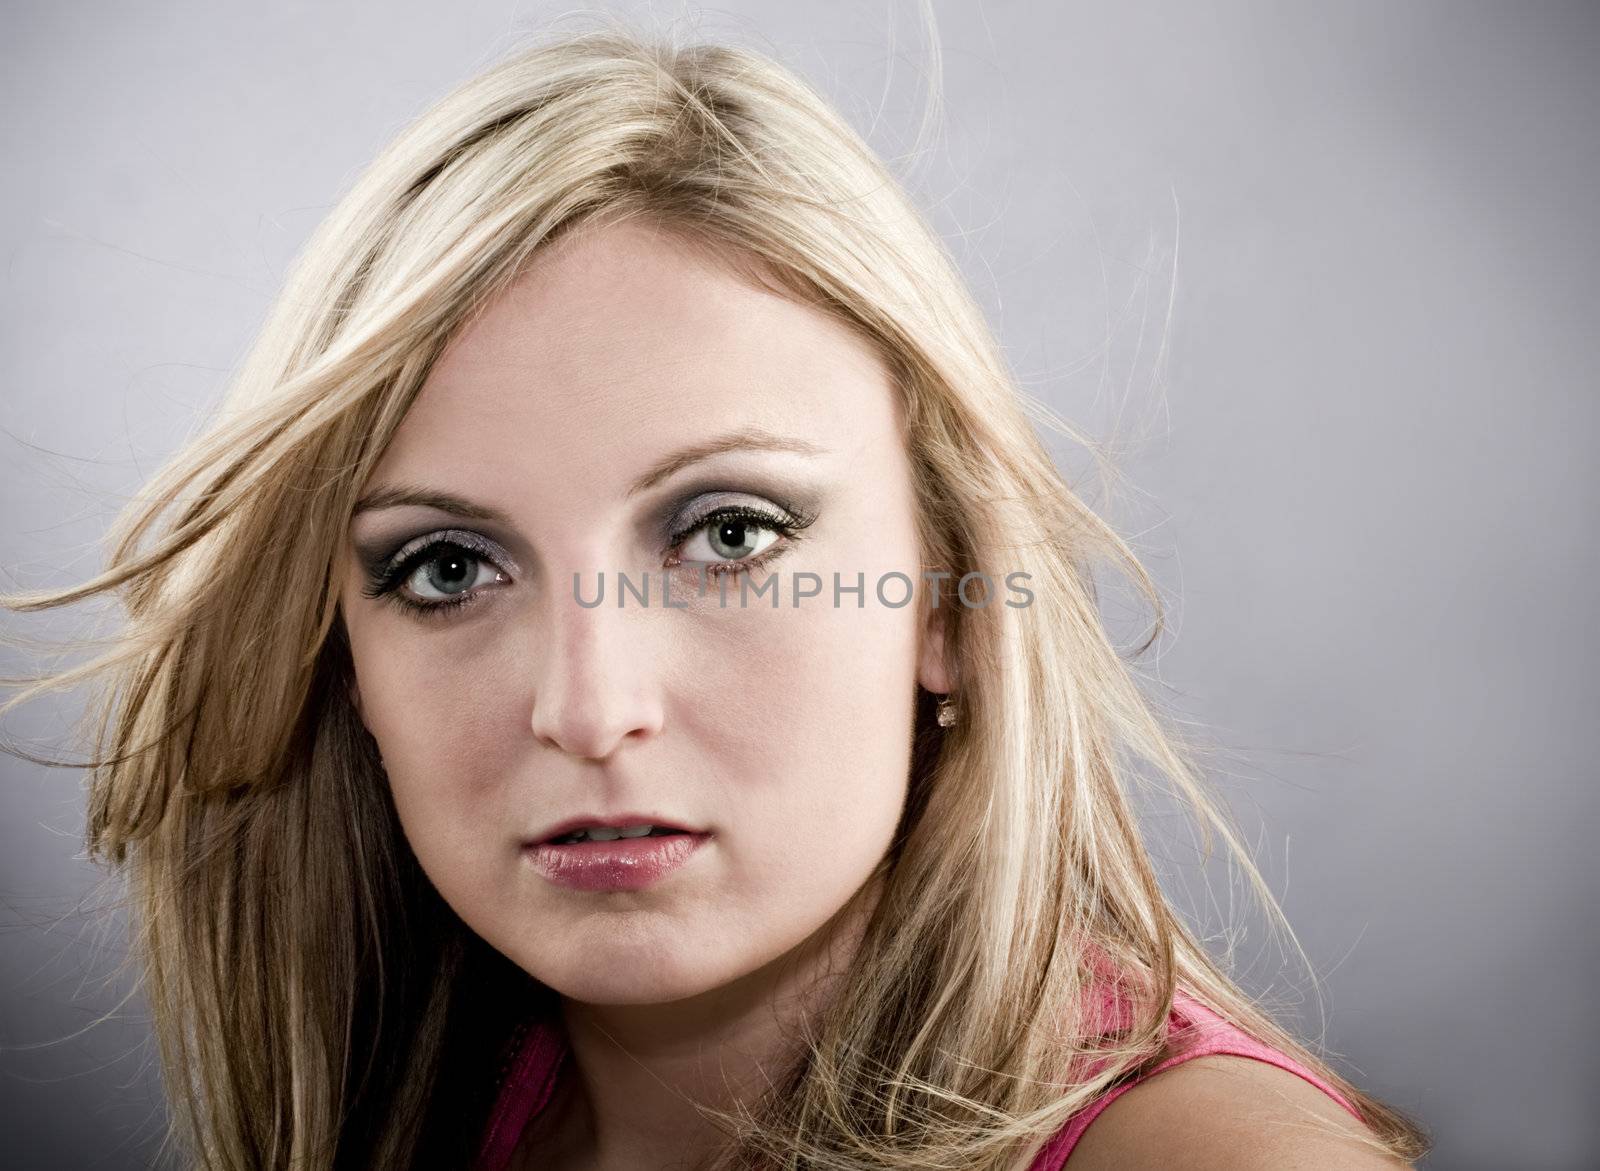 Great looking female model with hair blowing slightly and copy space.